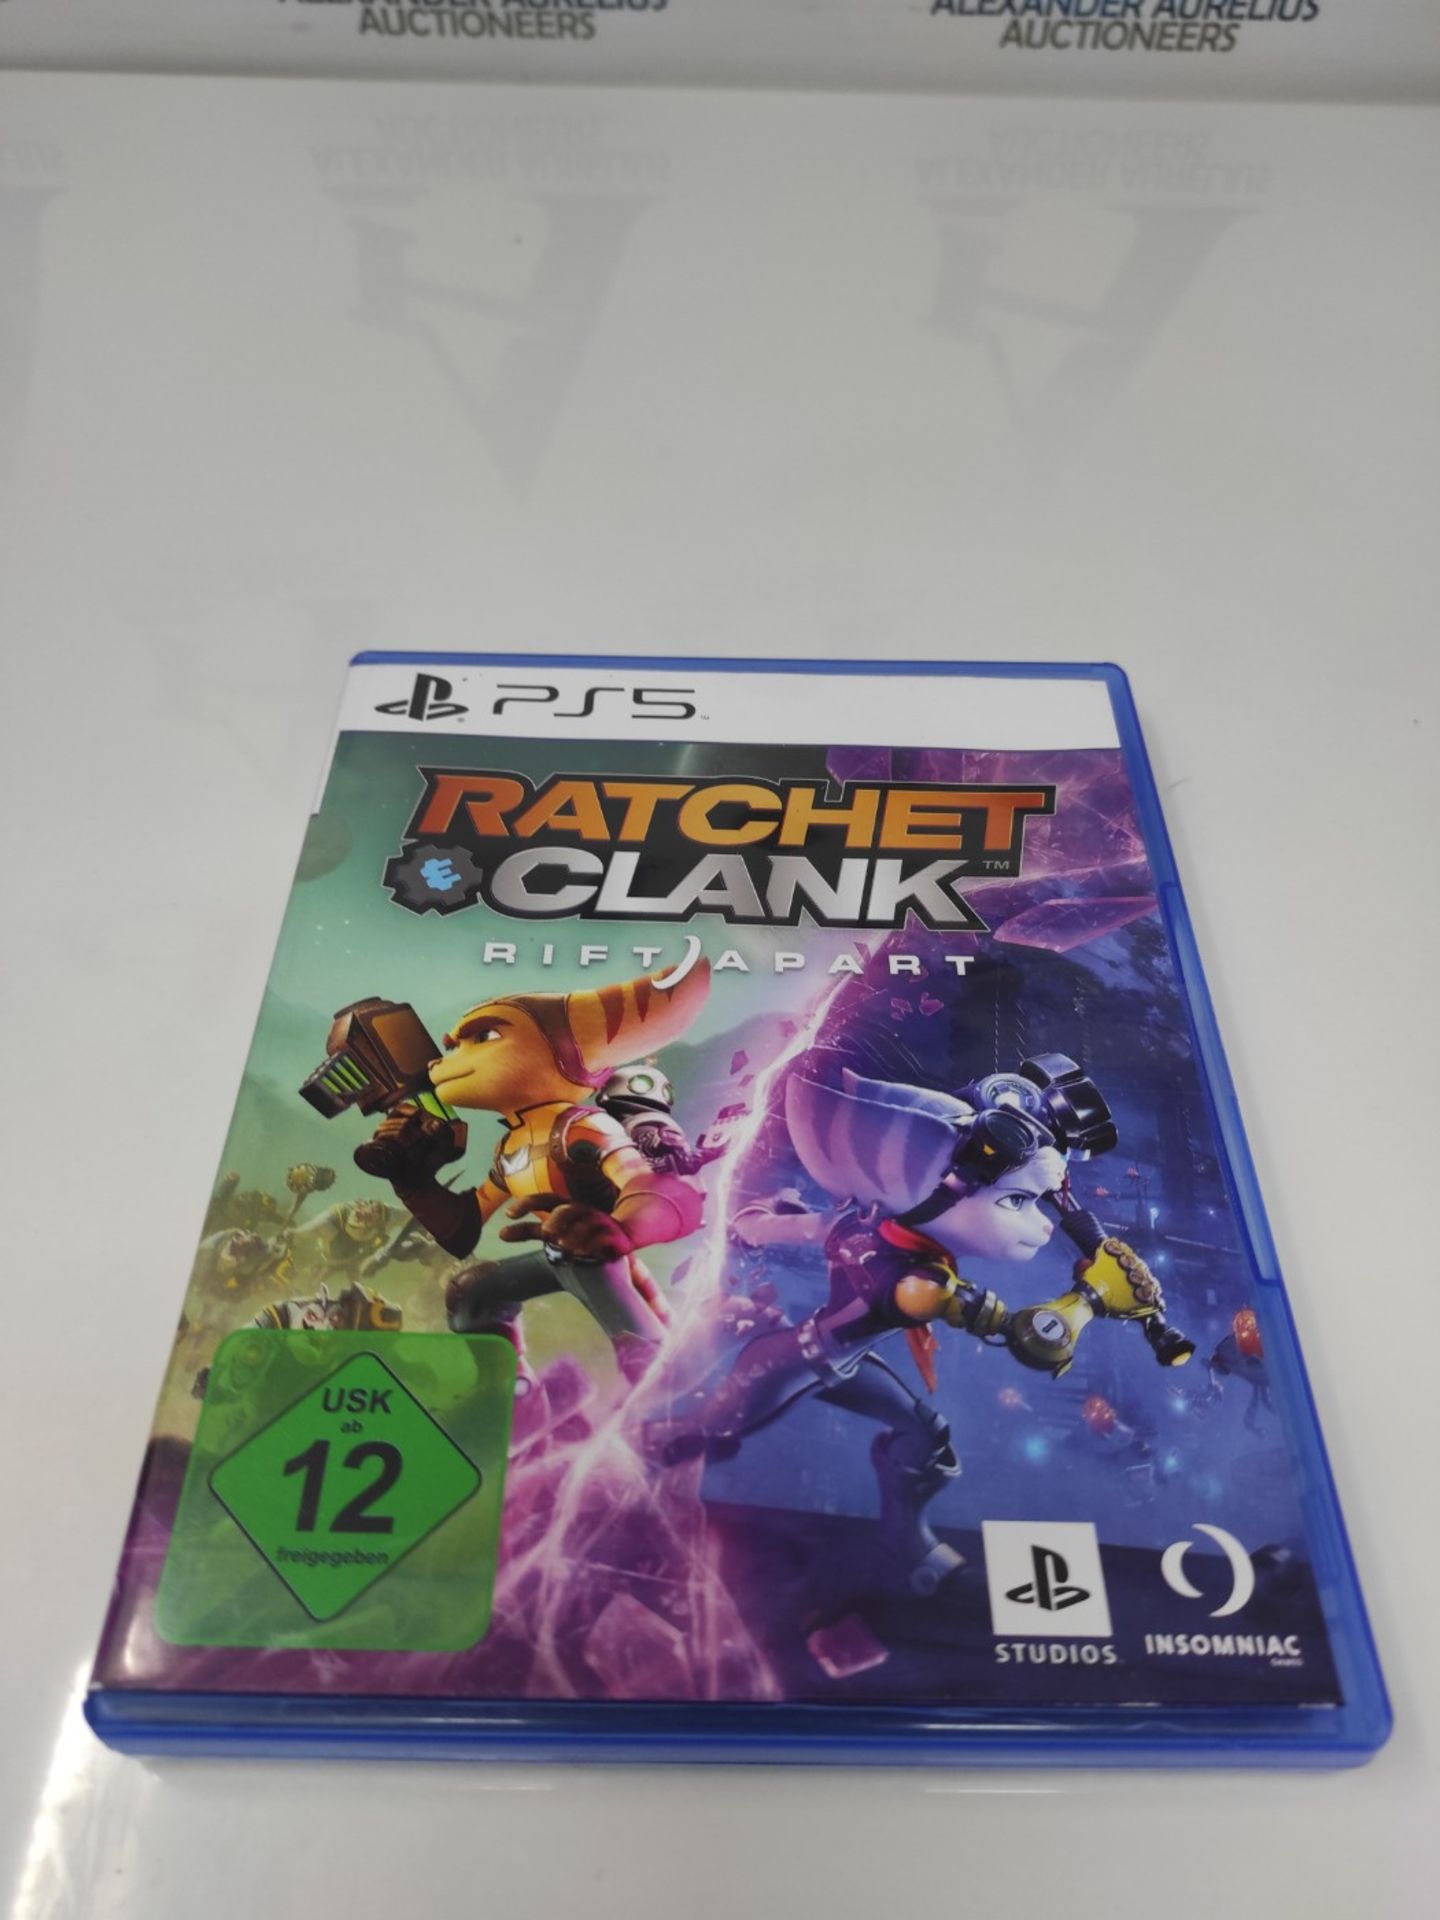 RRP £54.00 Sony, Ratchet & Clank: Rift Apart for PS5, Platform and Adventure game, Standard Editi - Image 5 of 6